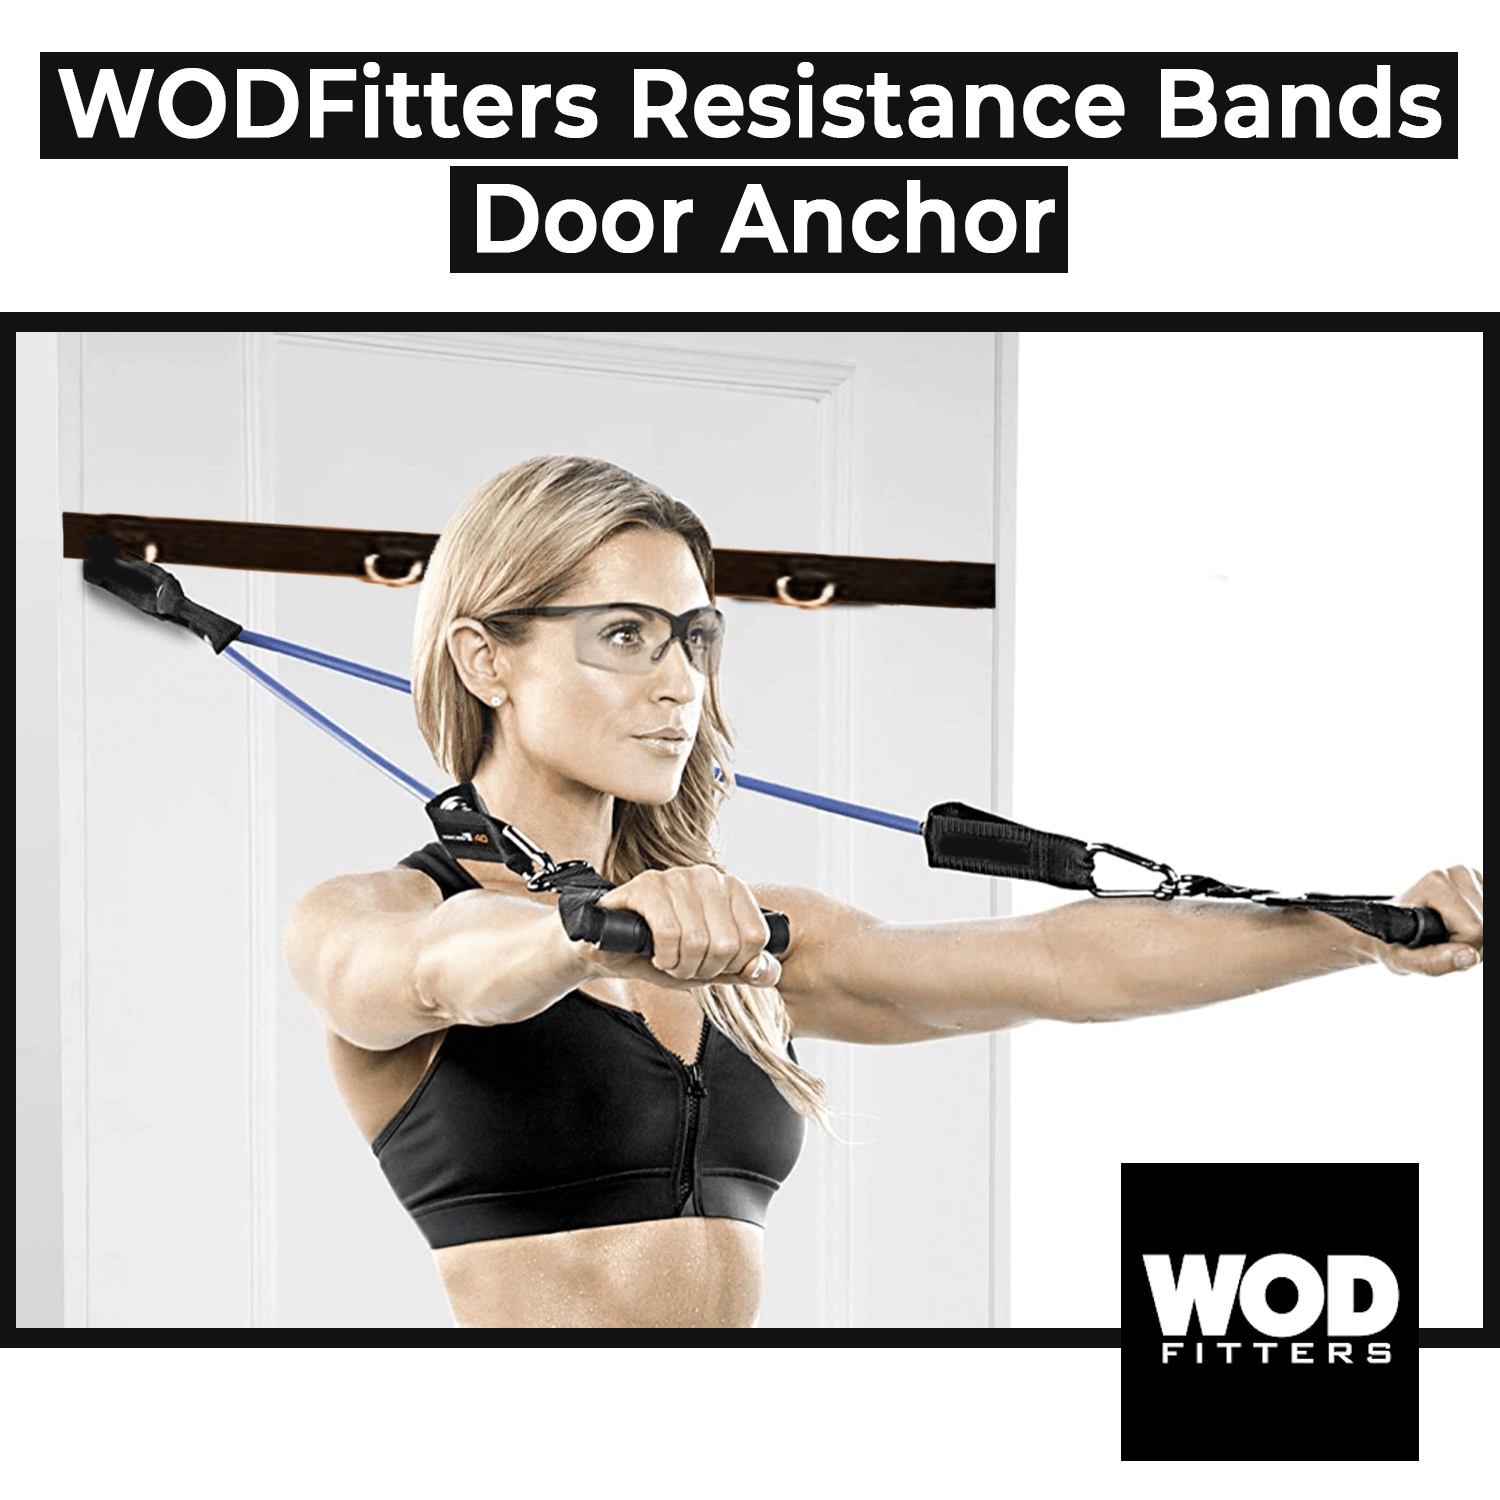 WODFitters Resistance Bands Door Anchor - SPECIAL OFFER!